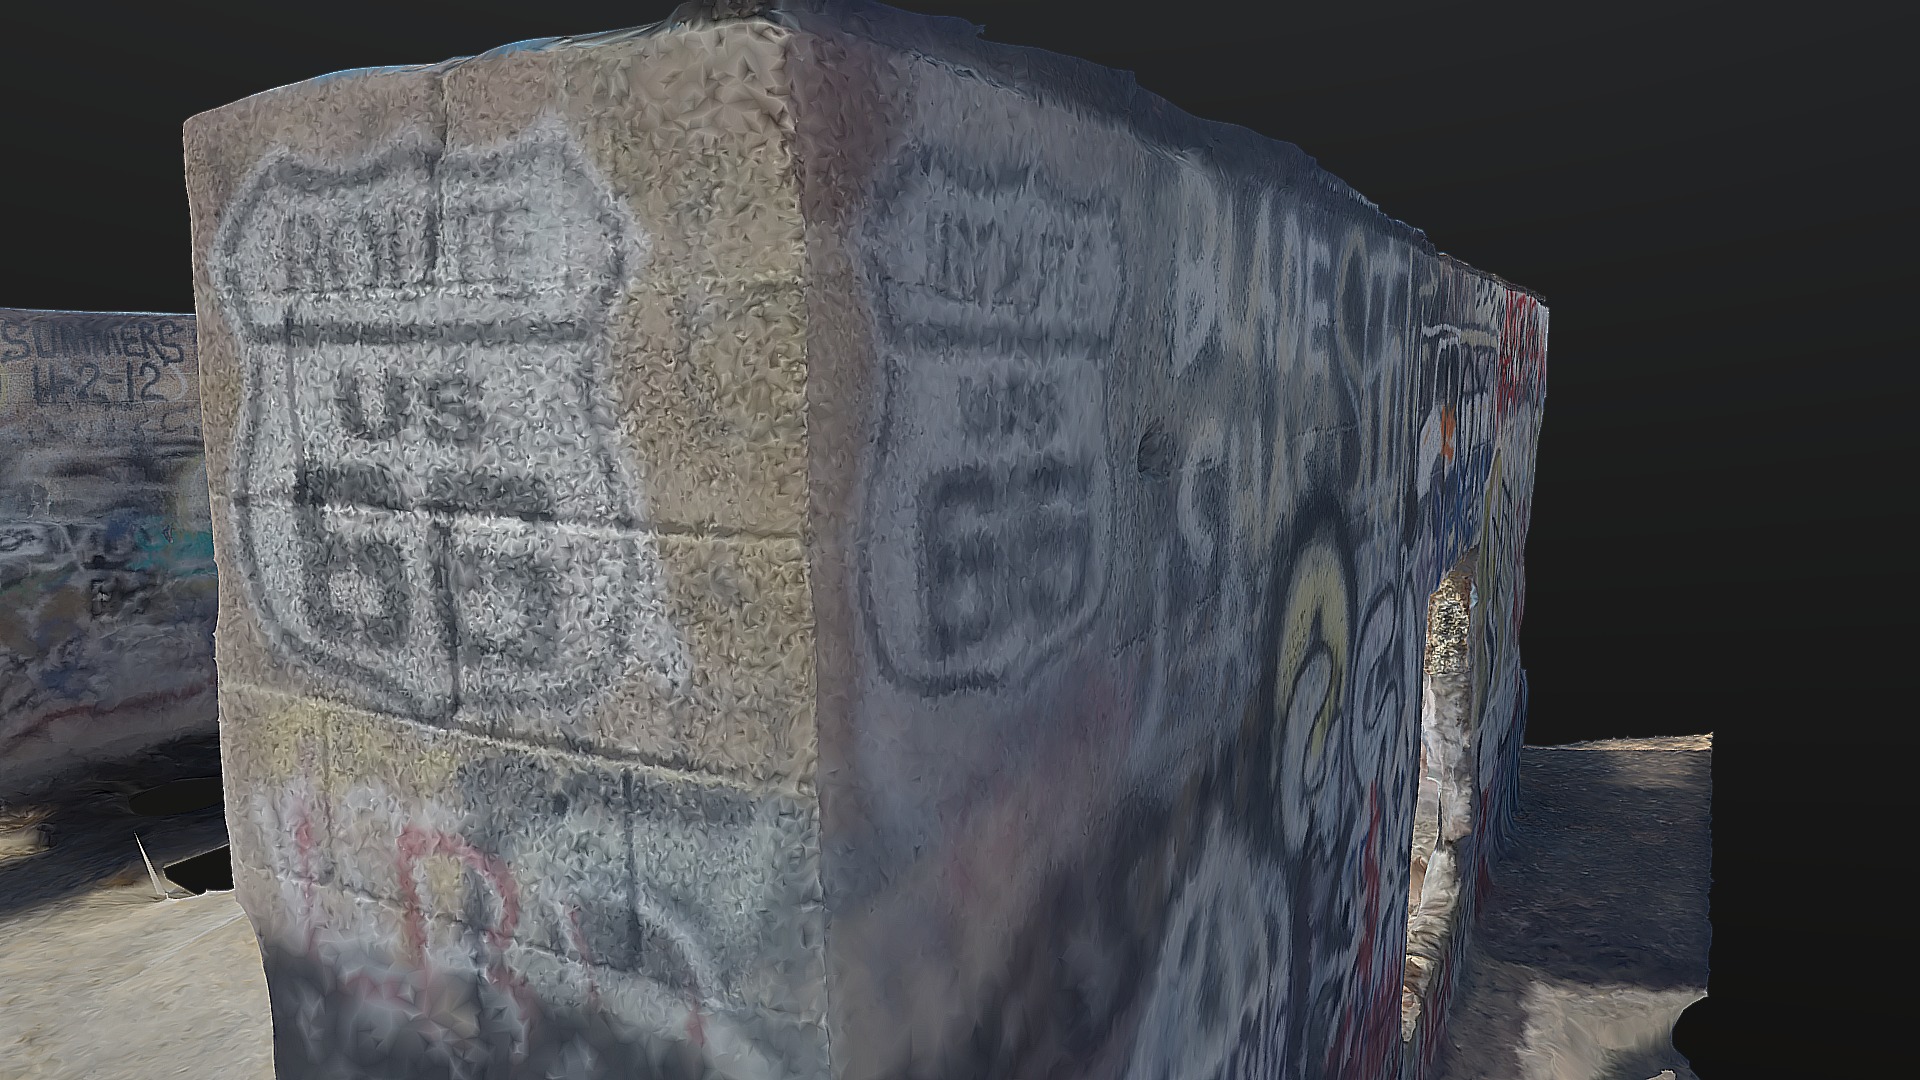 3D model GRADD 3D model / Abandoned Tagged Building - This is a 3D model of the GRADD 3D model / Abandoned Tagged Building. The 3D model is about a stone wall with a carved face.